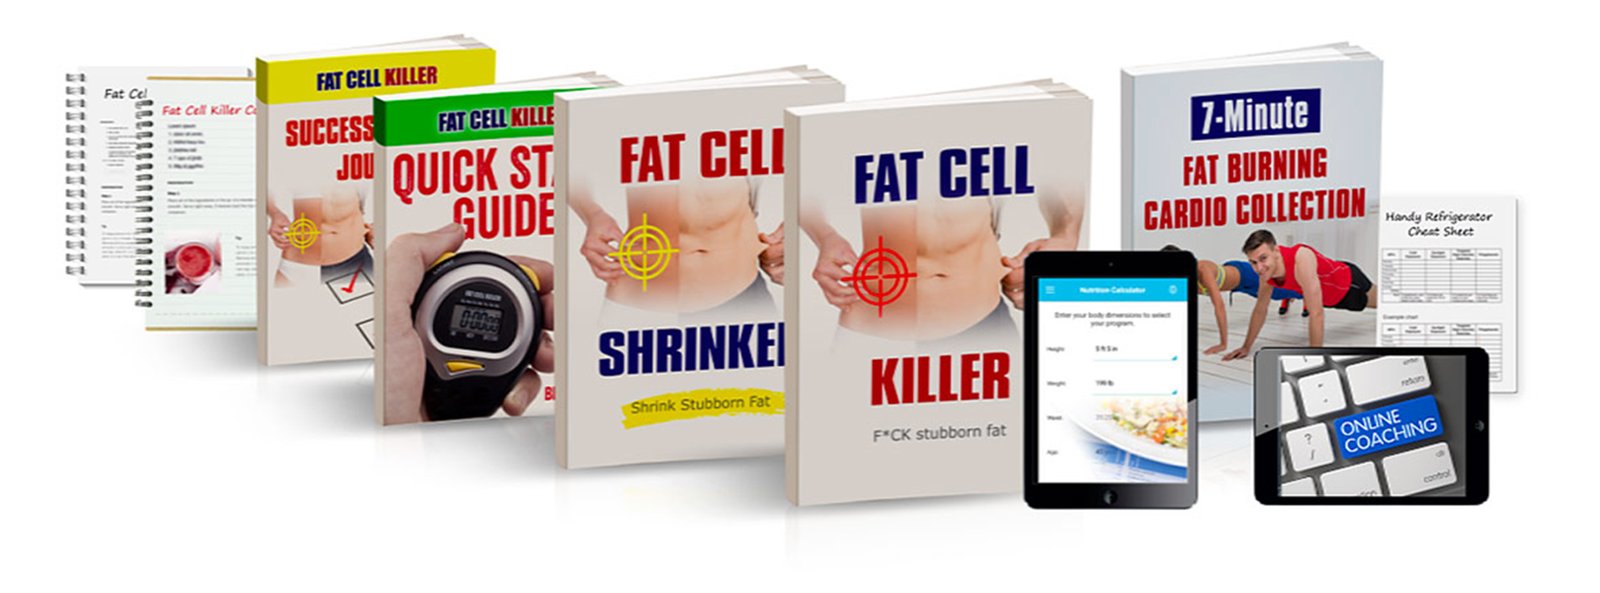 The-Fat-Cell-Killer-System-review